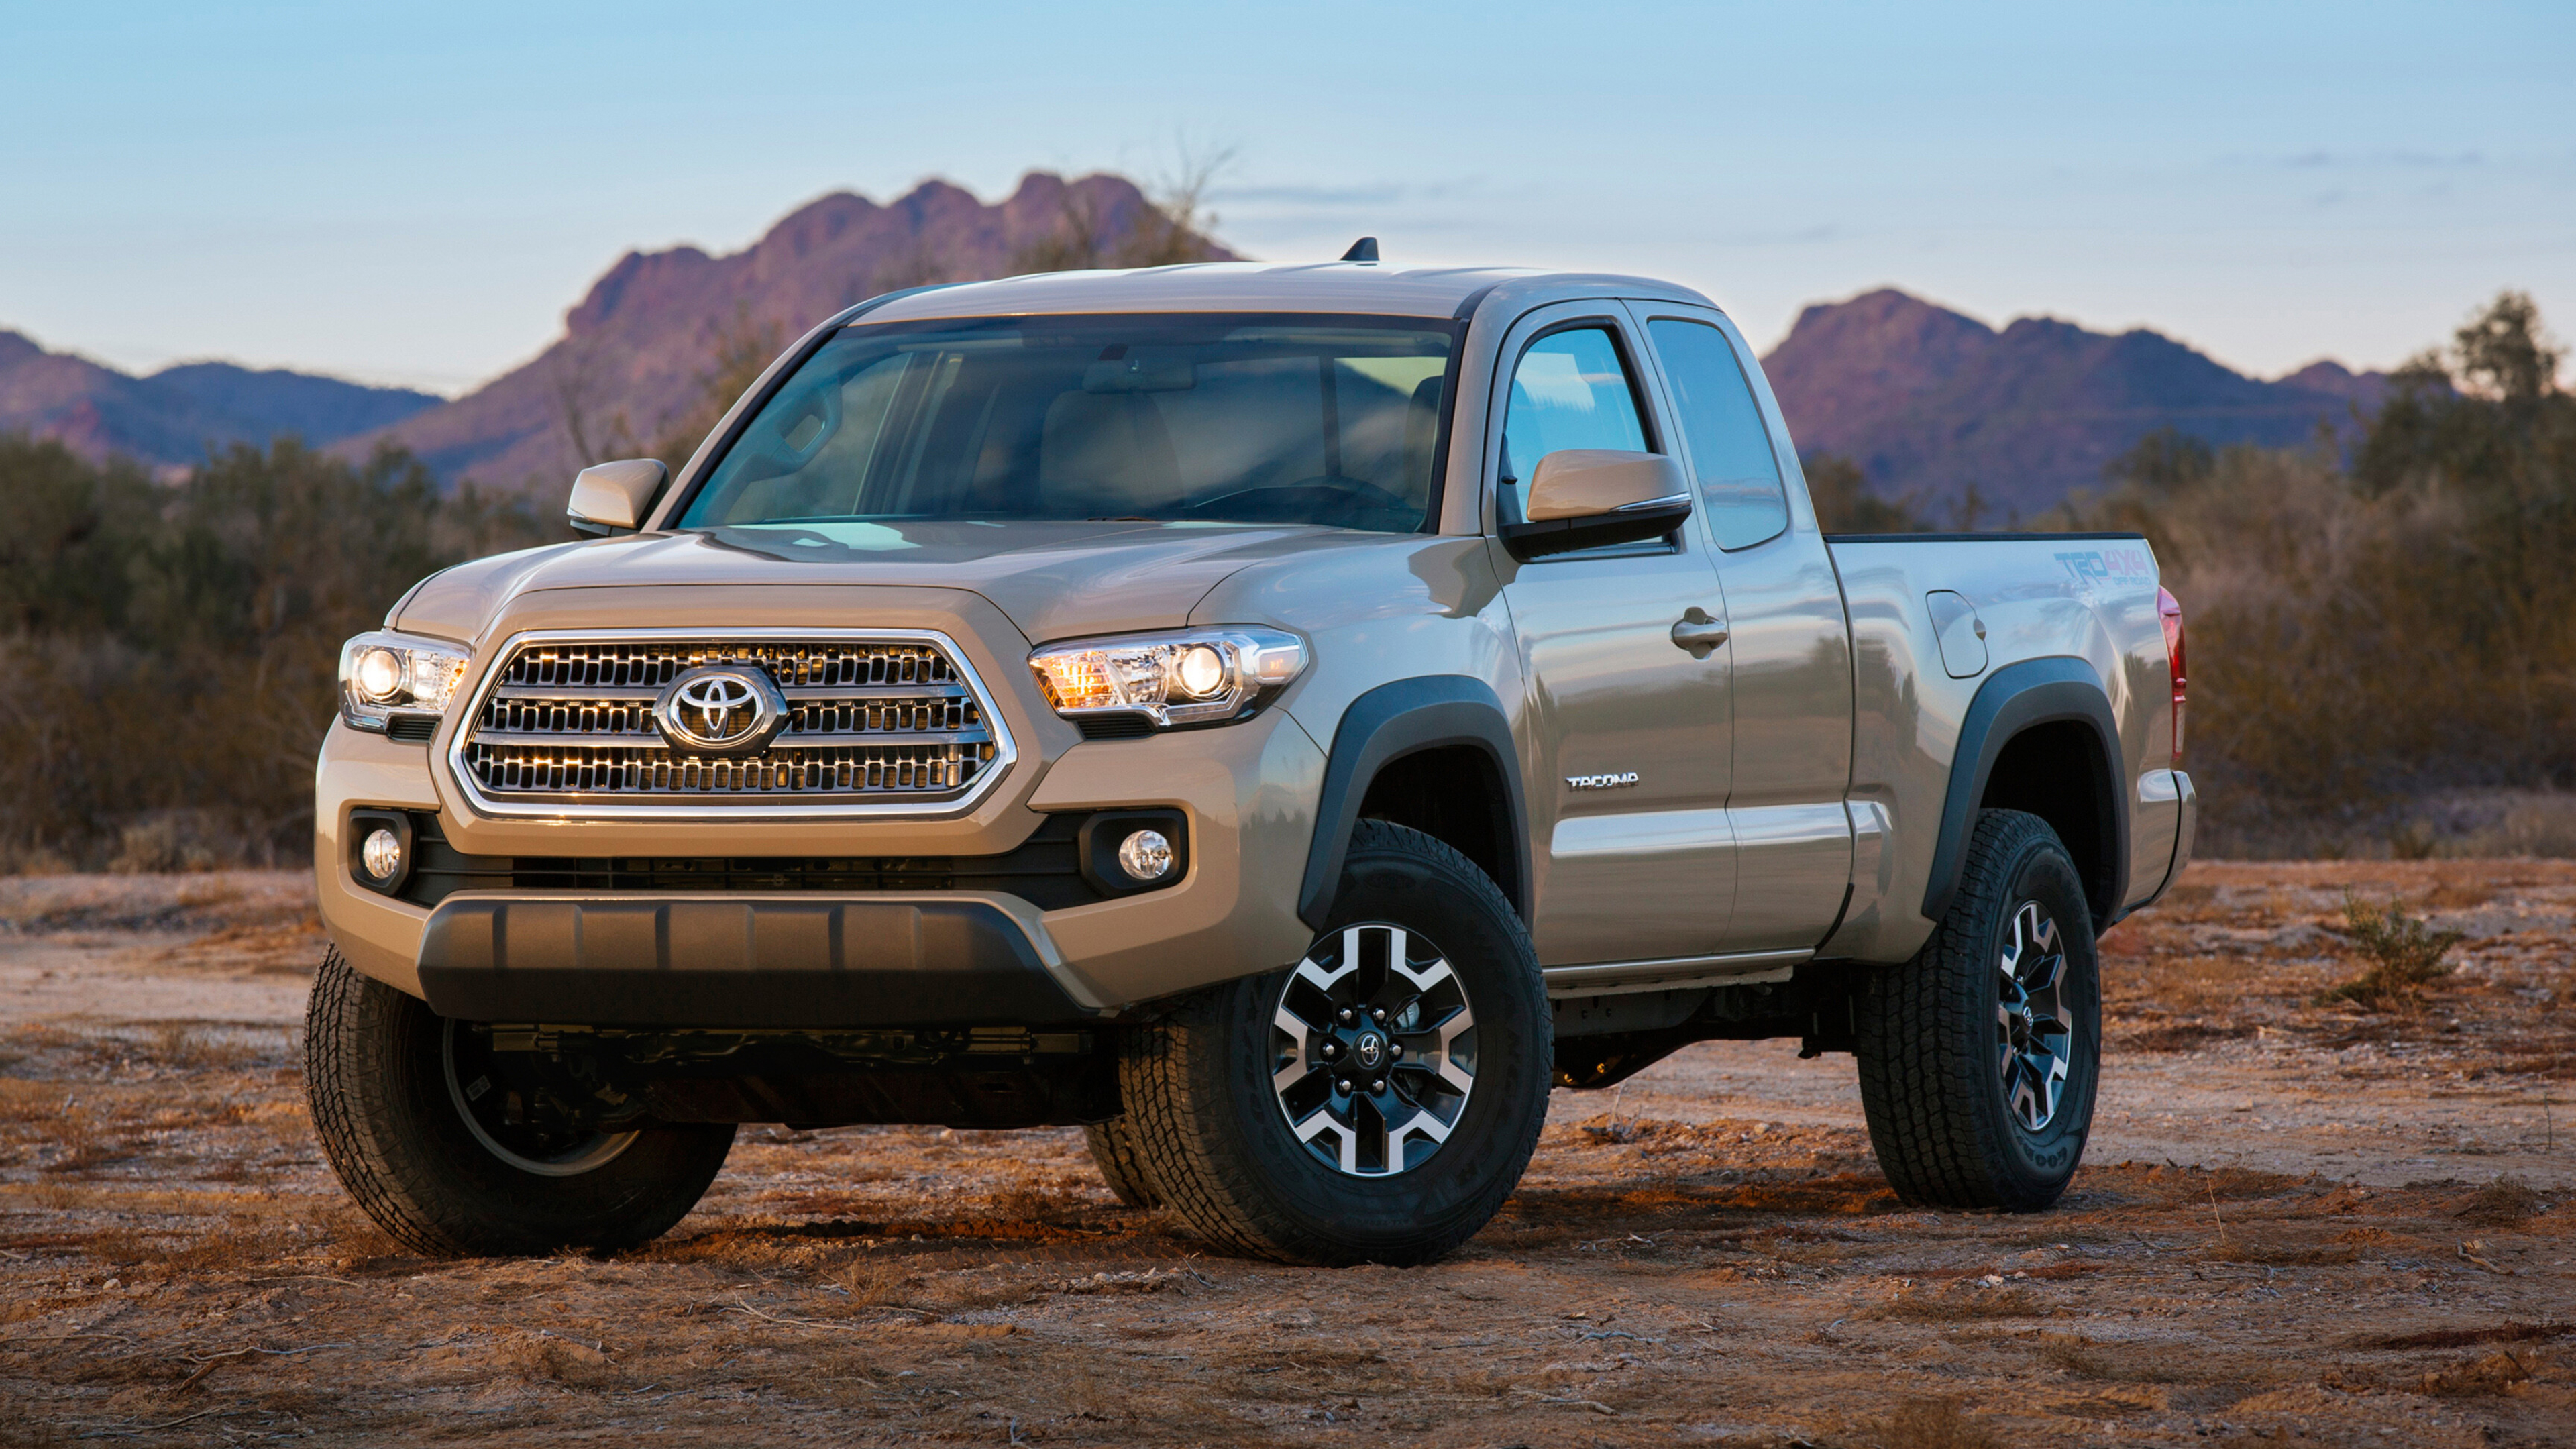 Toyota Tacoma: Cars, TRD Off-Road Access Cab, Japanese manufacturer. 3840x2160 4K Background.